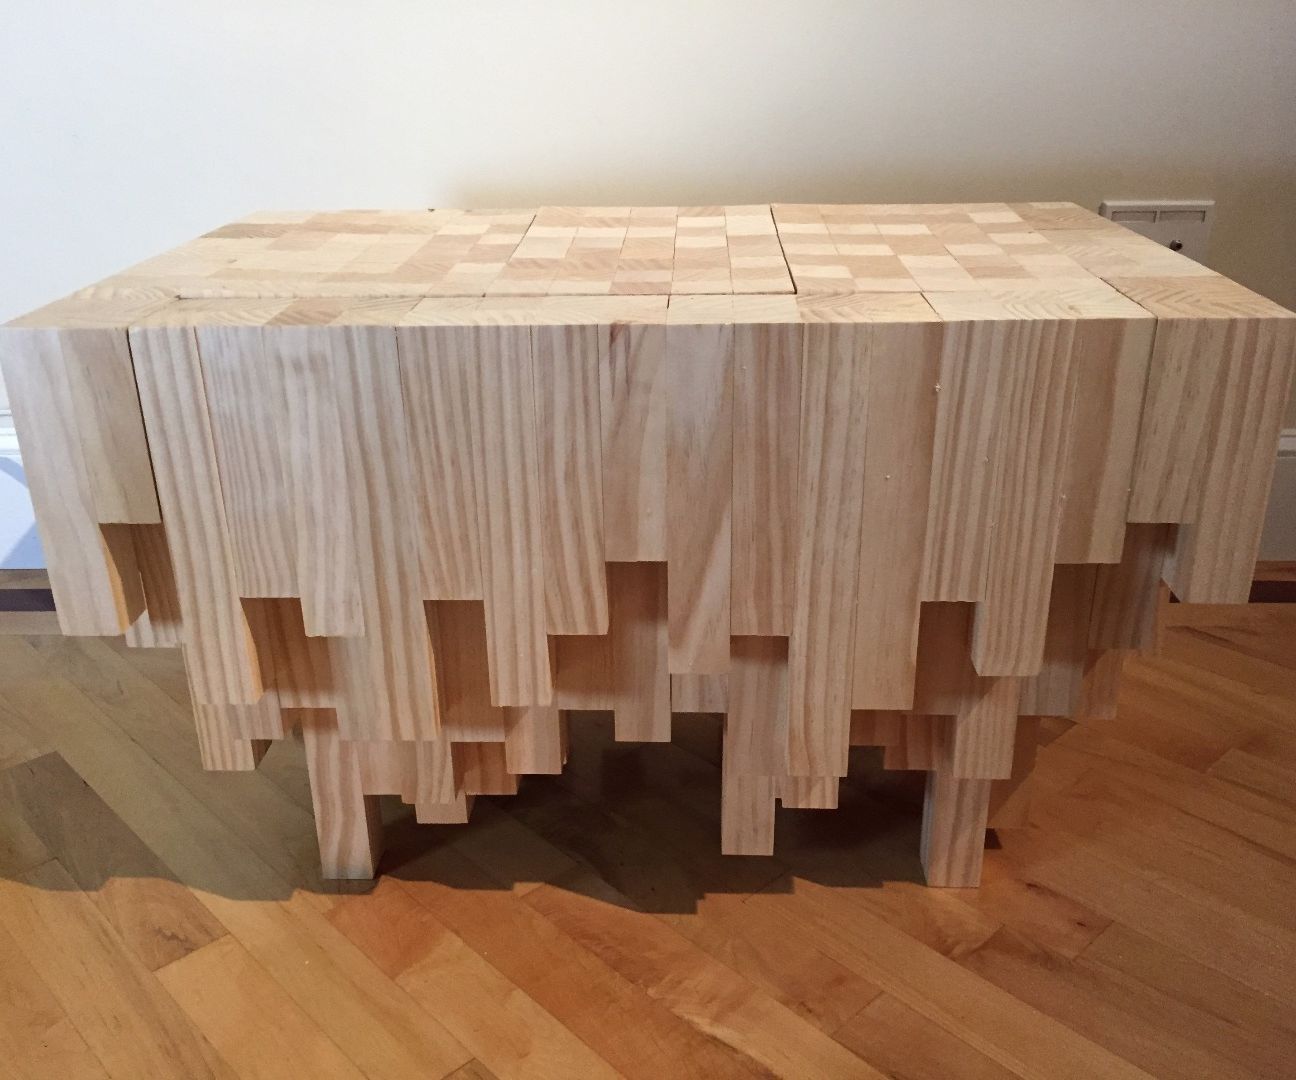 Cascade Coffee Table With Hidden Compartment | Coffee Table Inspiration Intended For Coffee Tables With Hidden Compartments (View 12 of 20)